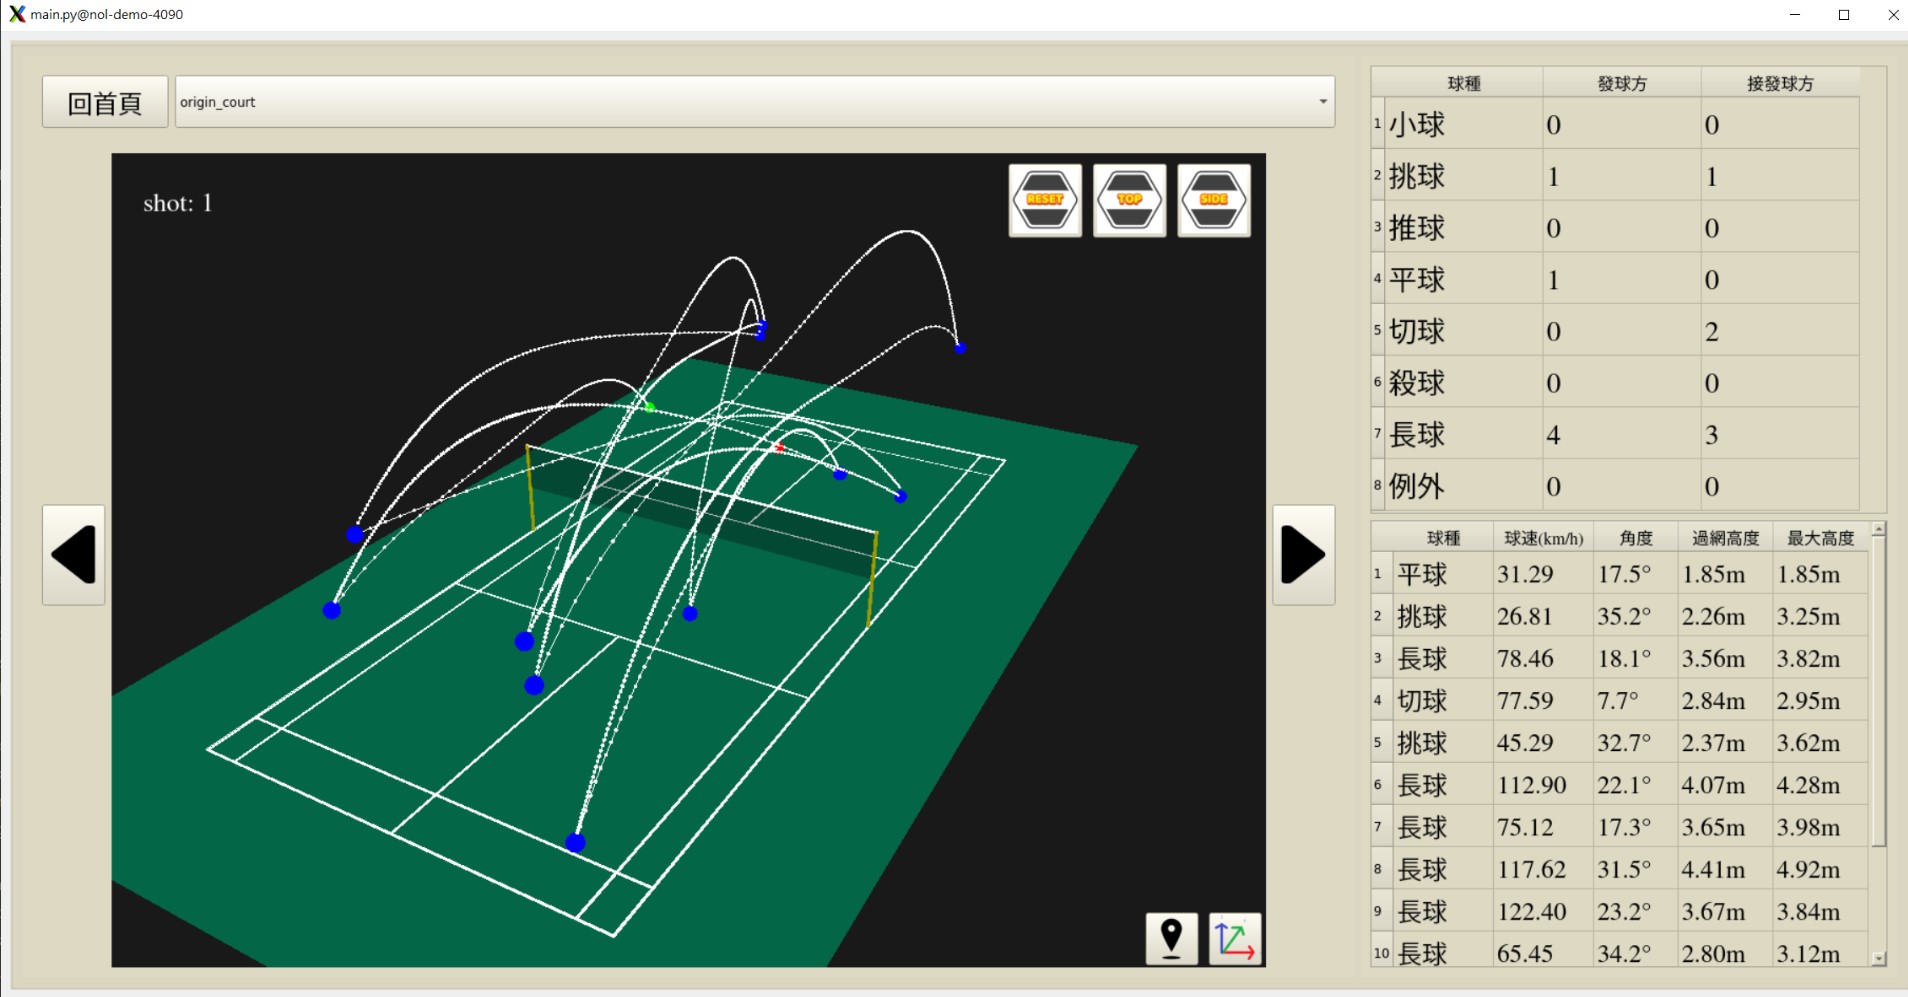 Insight into Badminton - Control Ability Evaluation System